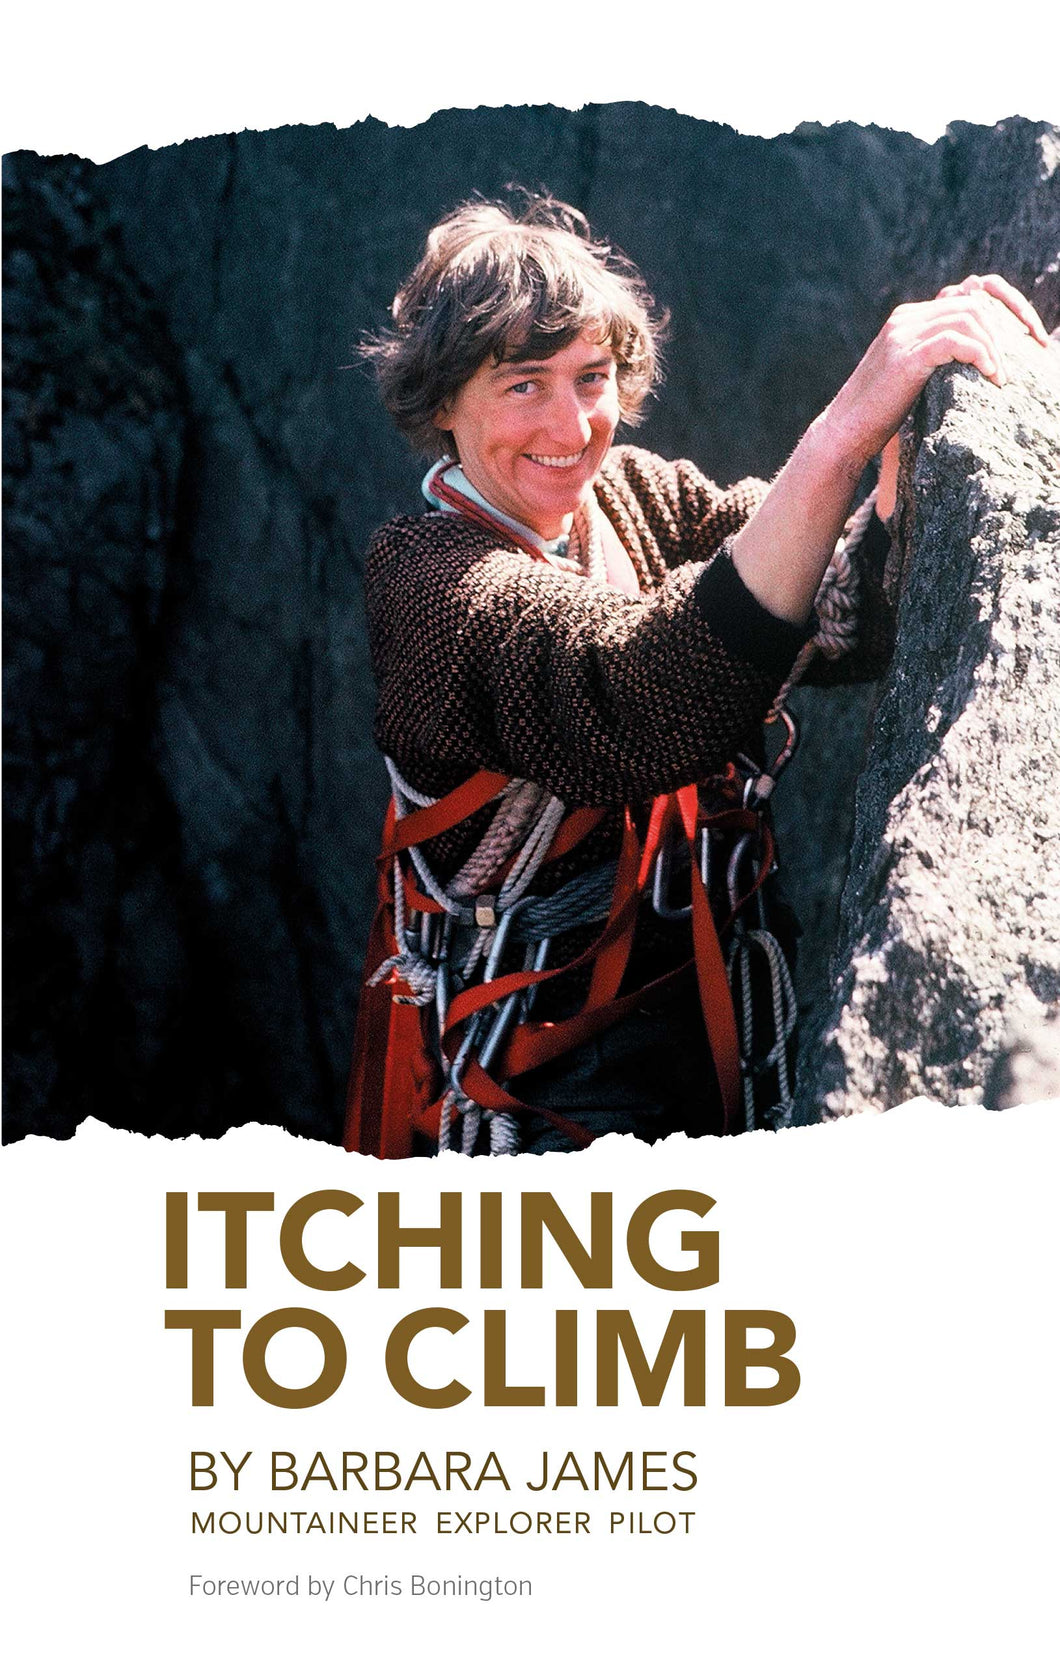 Itching to Climb, one of the first autobiographies from a female climber